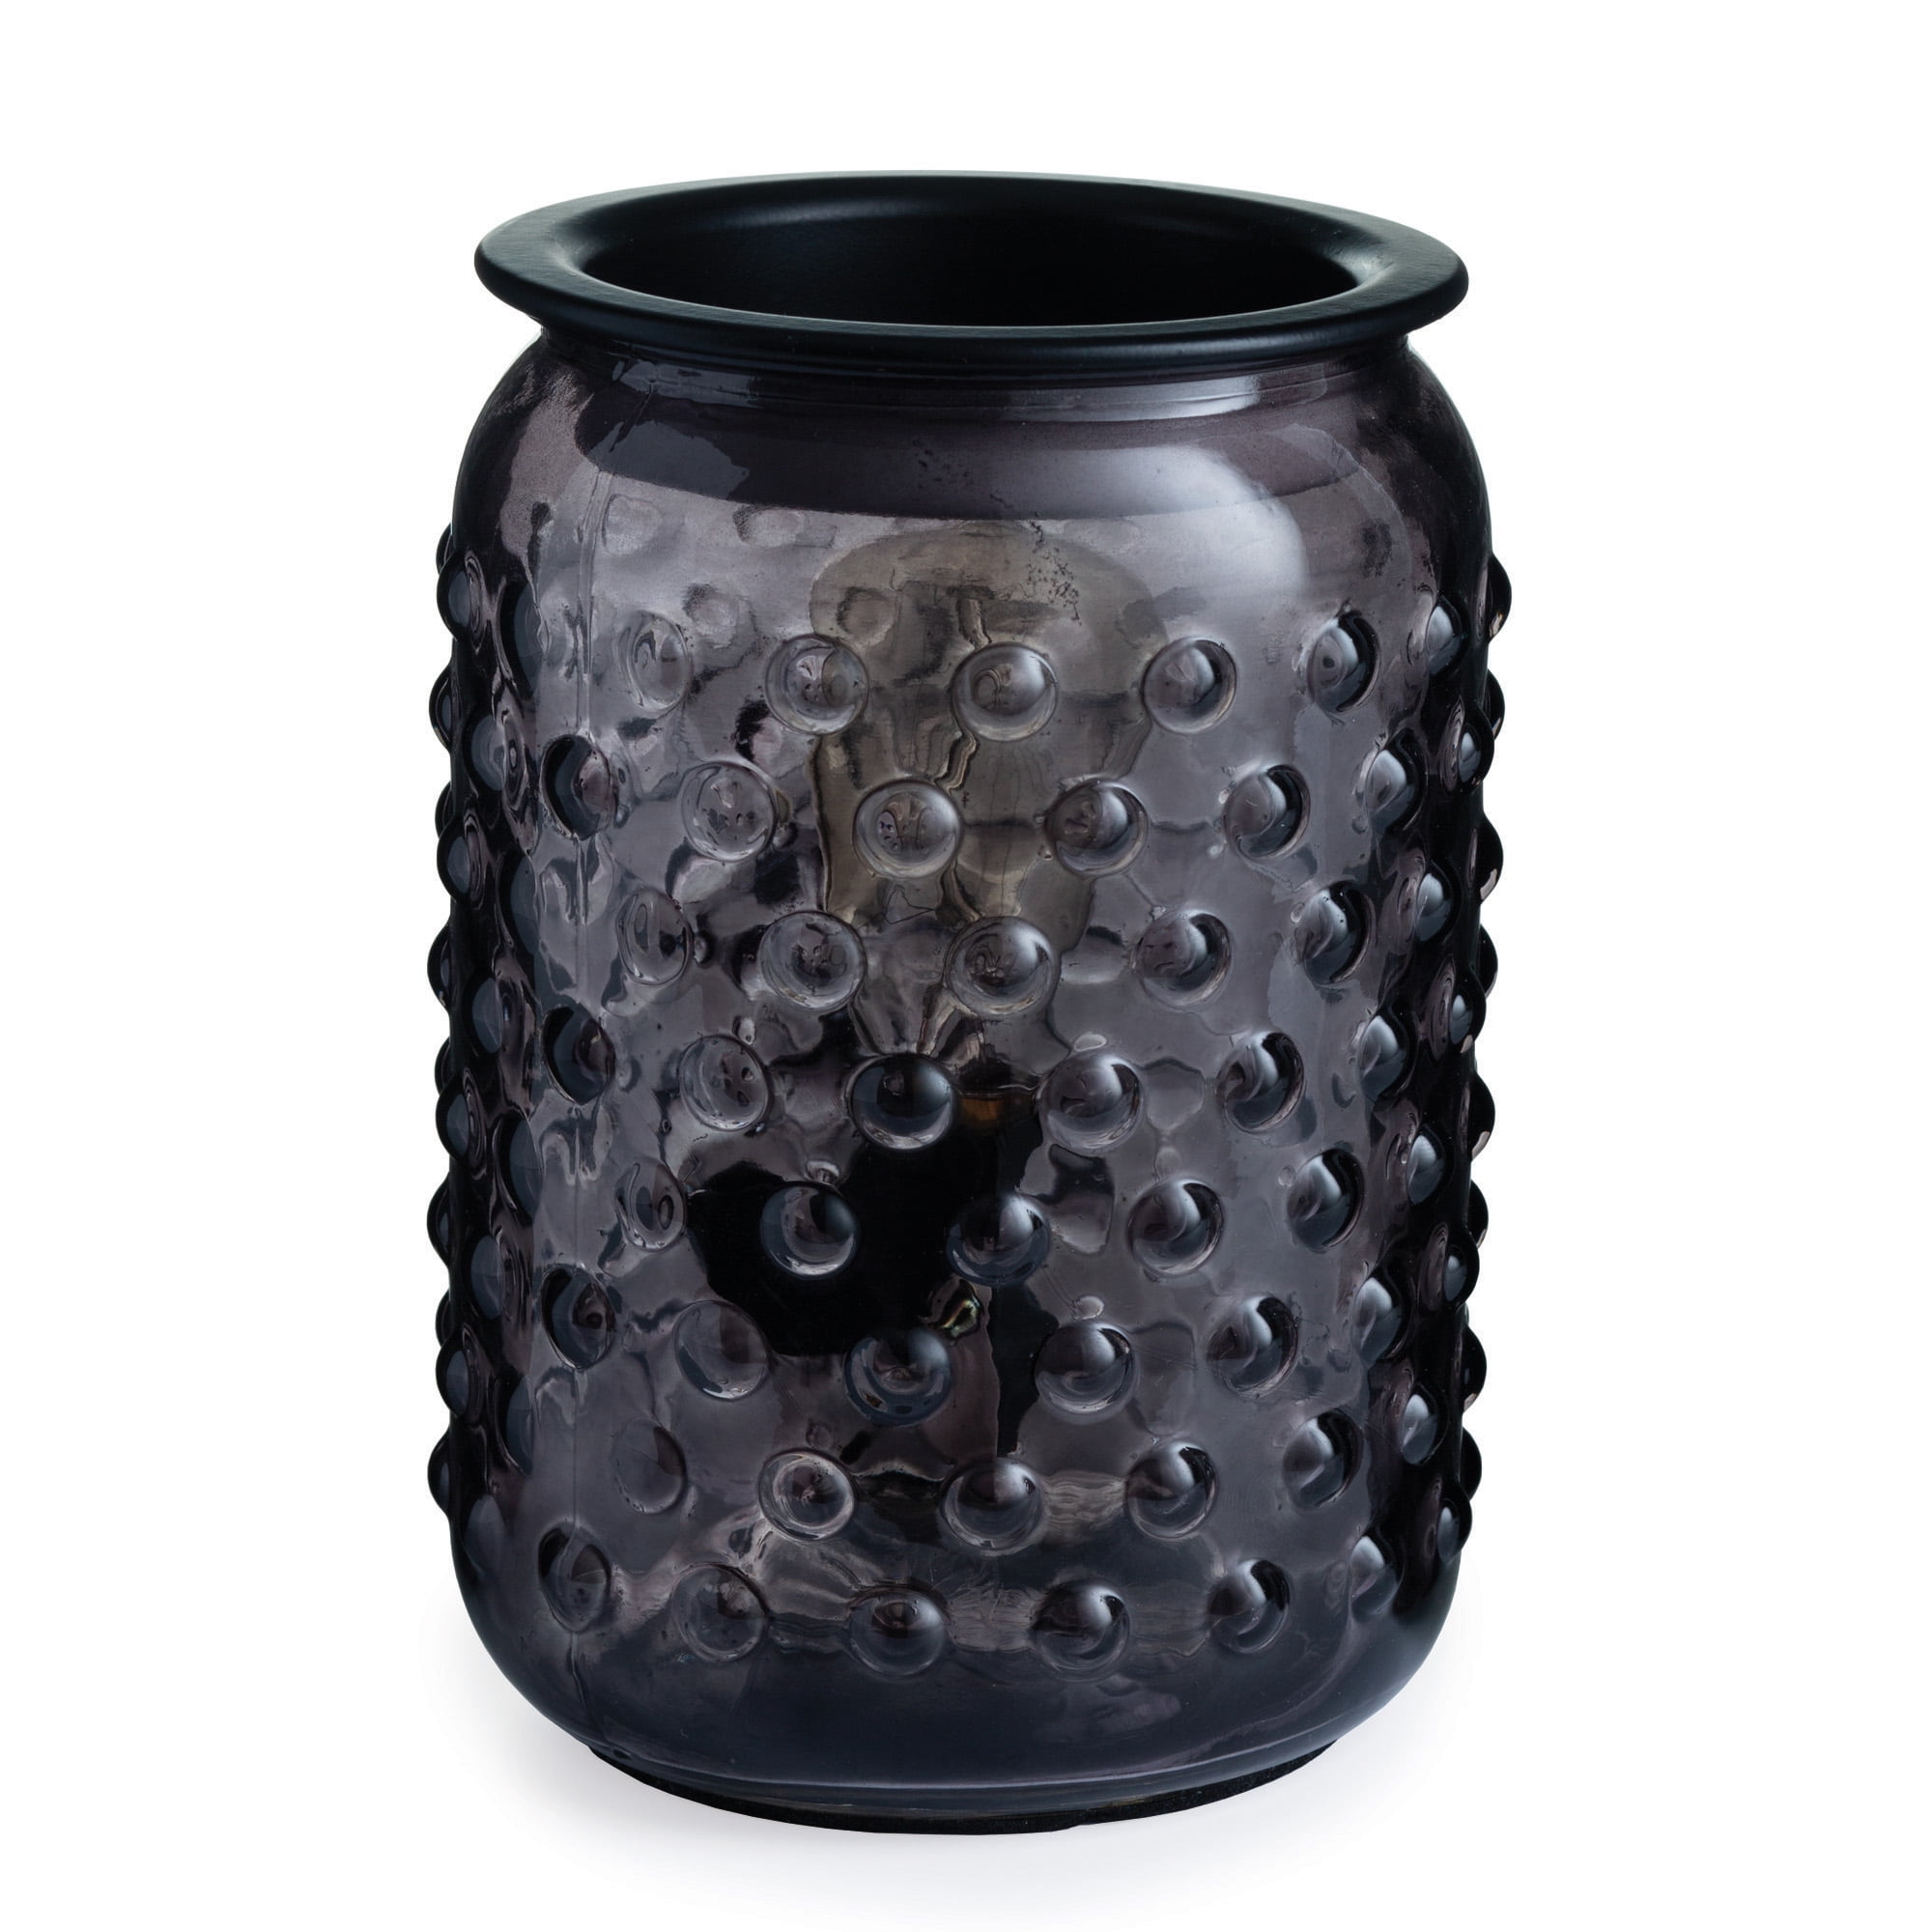 VIntage Bulb Electric Wax Melter/Burner - Inc. Free Wax Melts - Black  Lighted Candle Wax Burner — 865 Candle Company